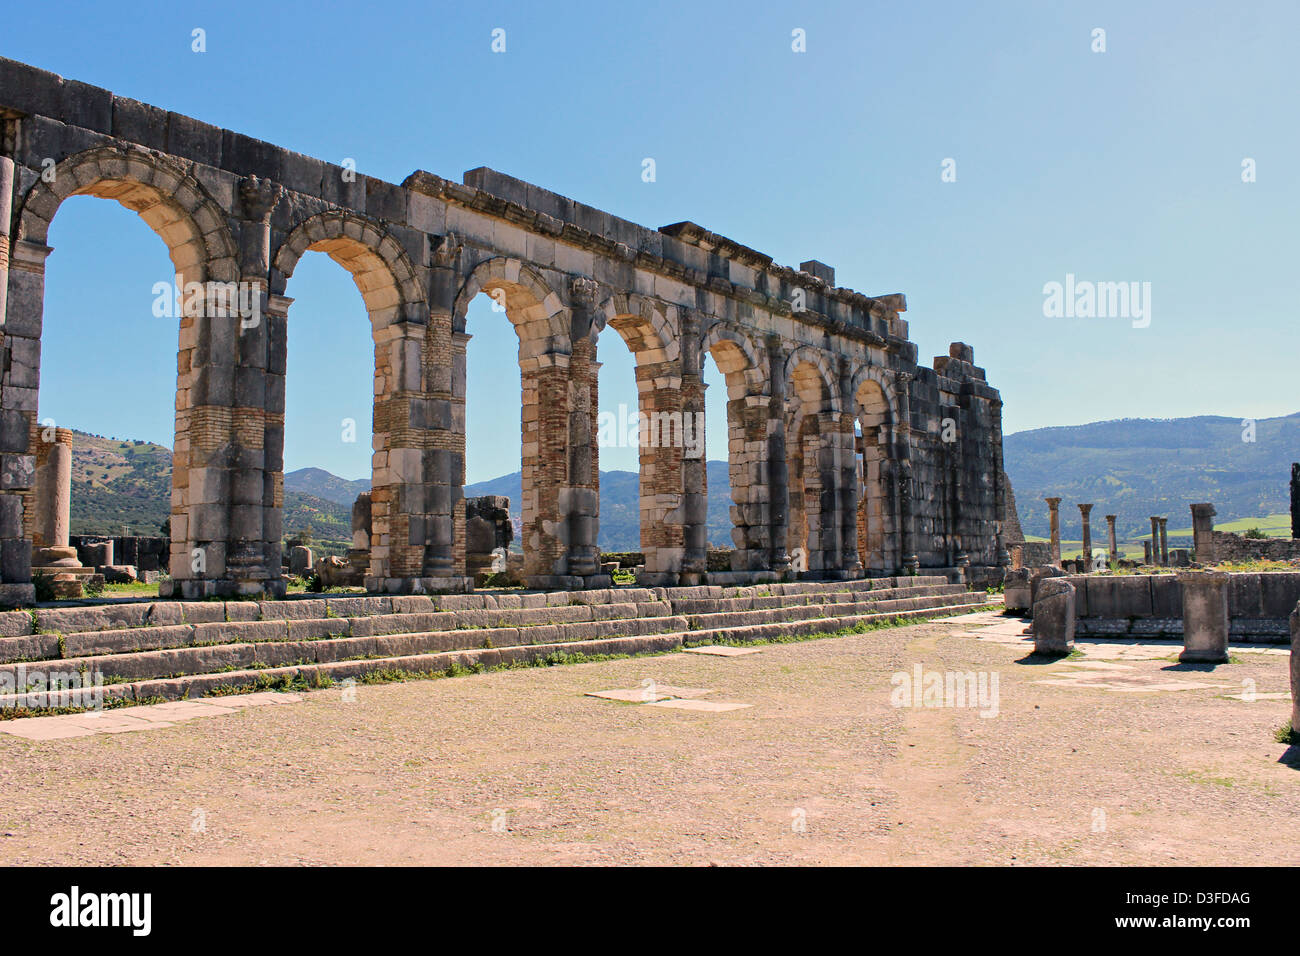 An overview of the building in the archaeological site Volubilis, in Morocco. World Heritage Site UNESCO. Stock Photo